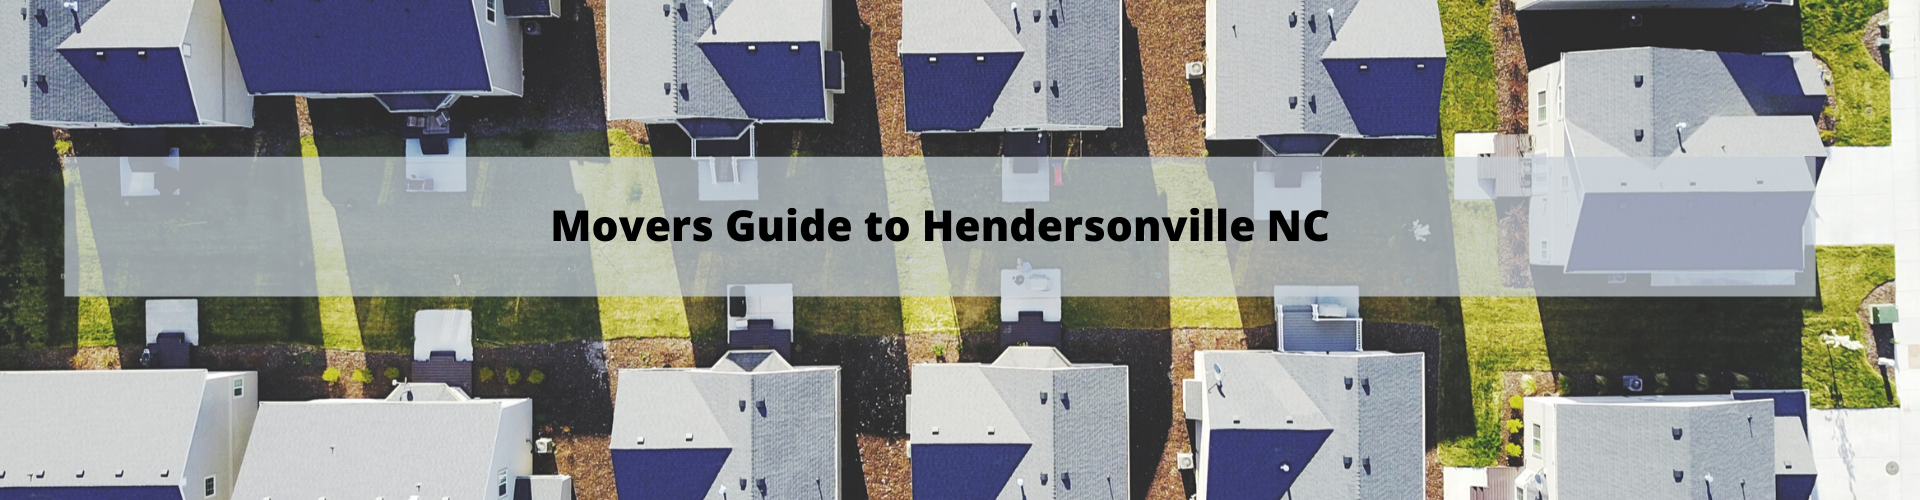 Movers Guide To Hendersonville NC